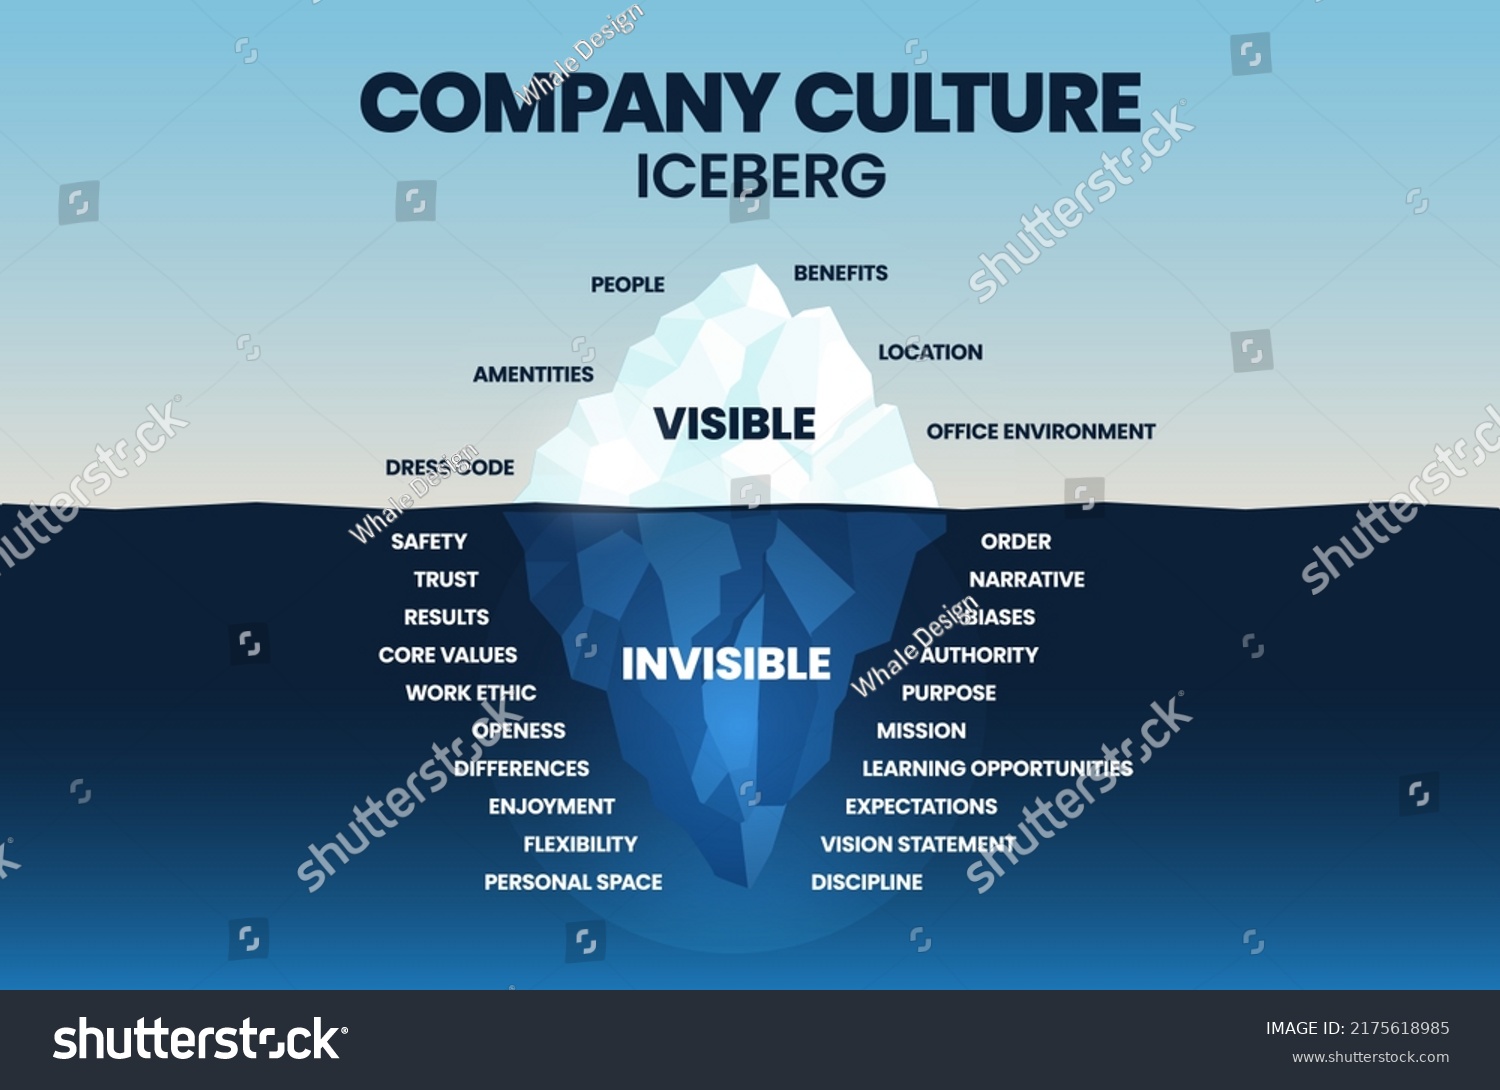 Company Culture Iceberg Model Allows You Stock Vector (Royalty Free ...